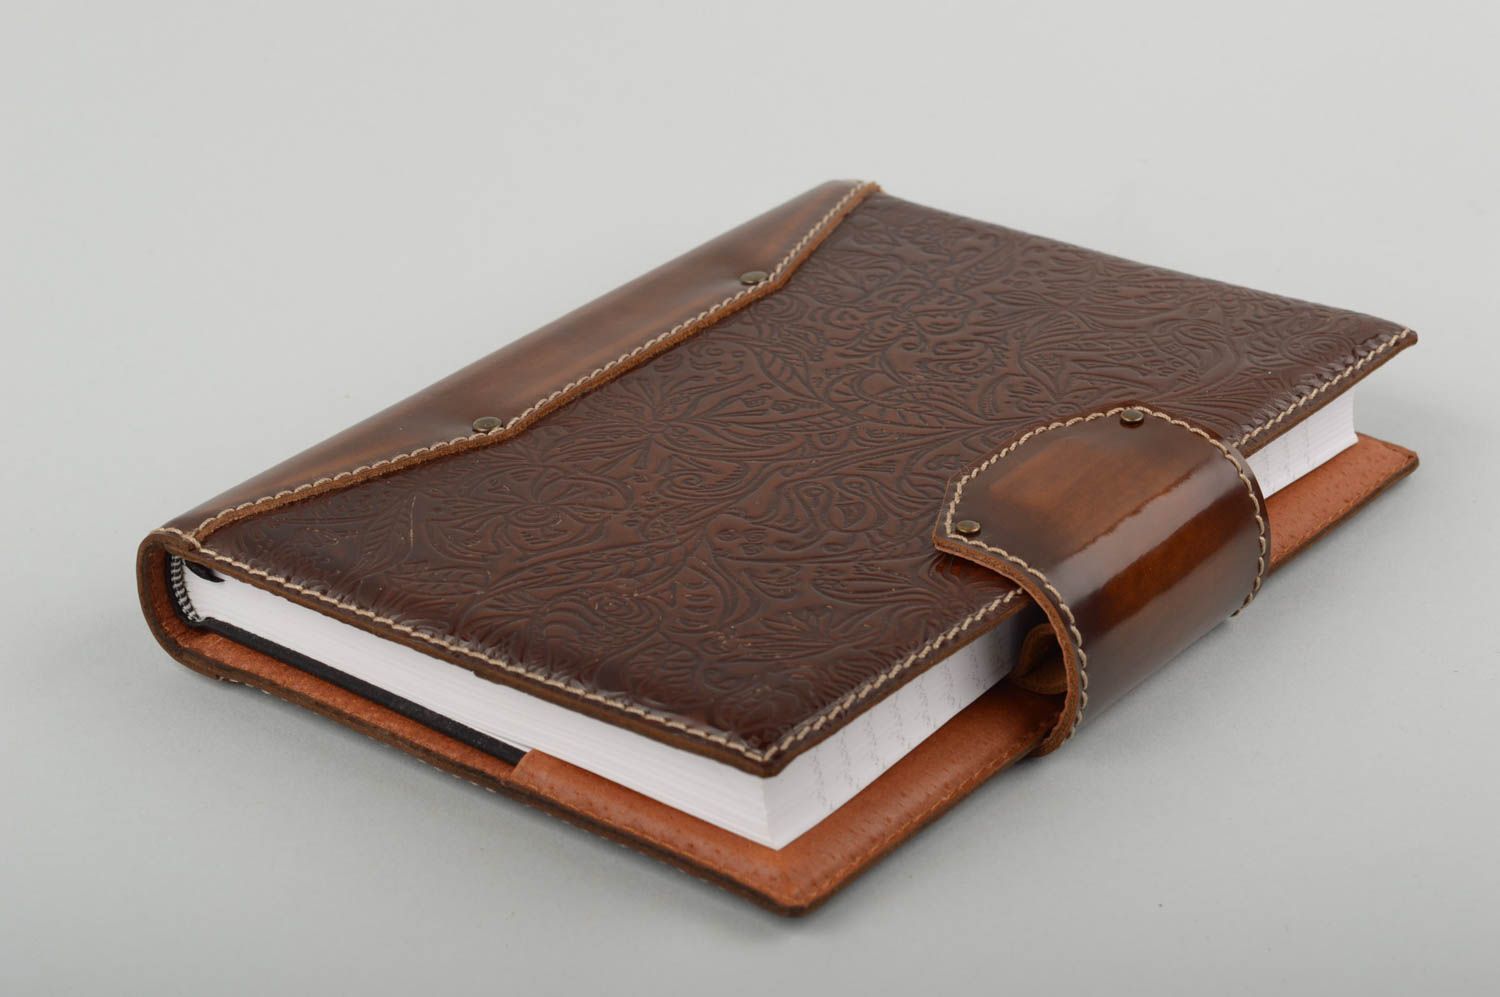 Stylish handmade notebook with leather cover stationery designs leather goods photo 2